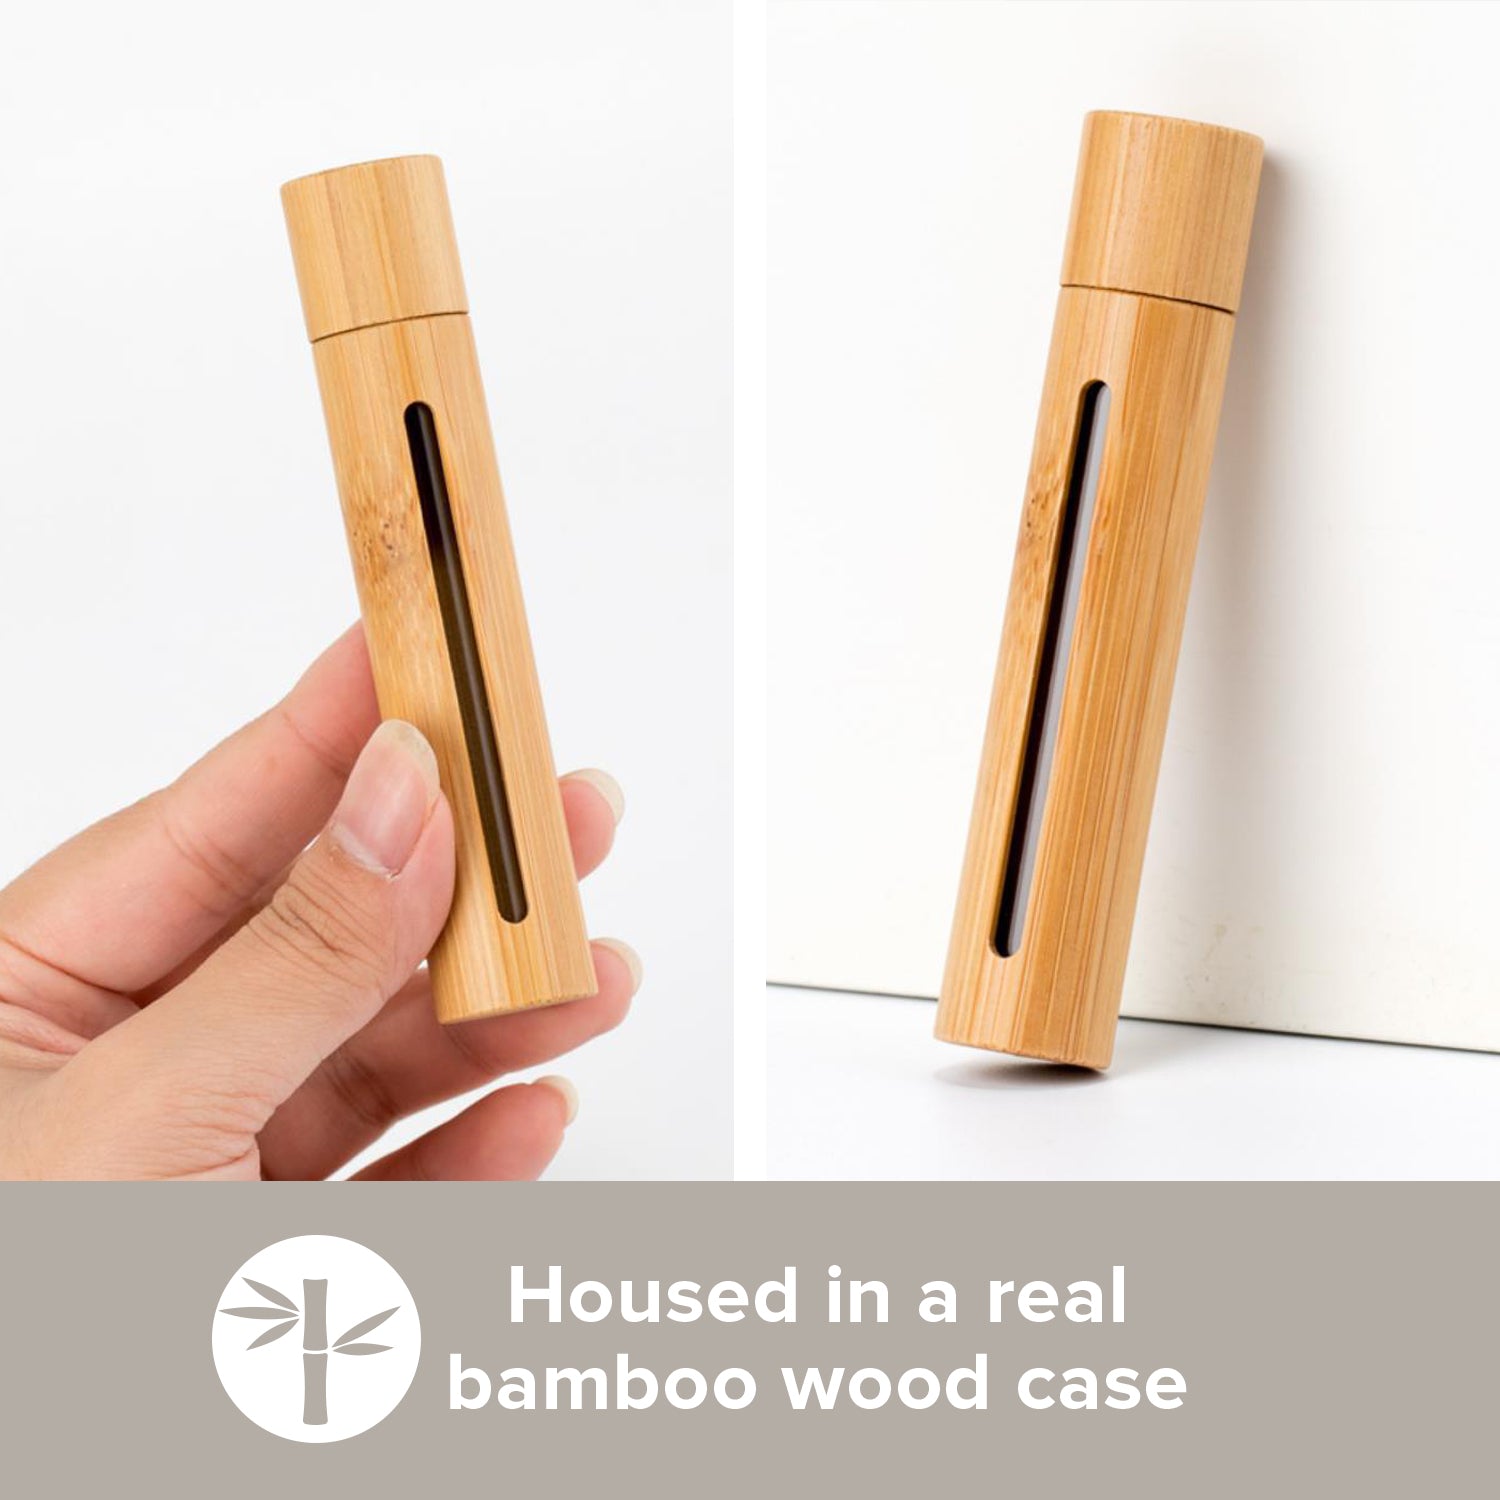 Load image into Gallery viewer, Bamboo Refillable Essential Oil Fragrance Roll On Bottles | Organic Eco Style I 3 Sizes Value 3 Pack